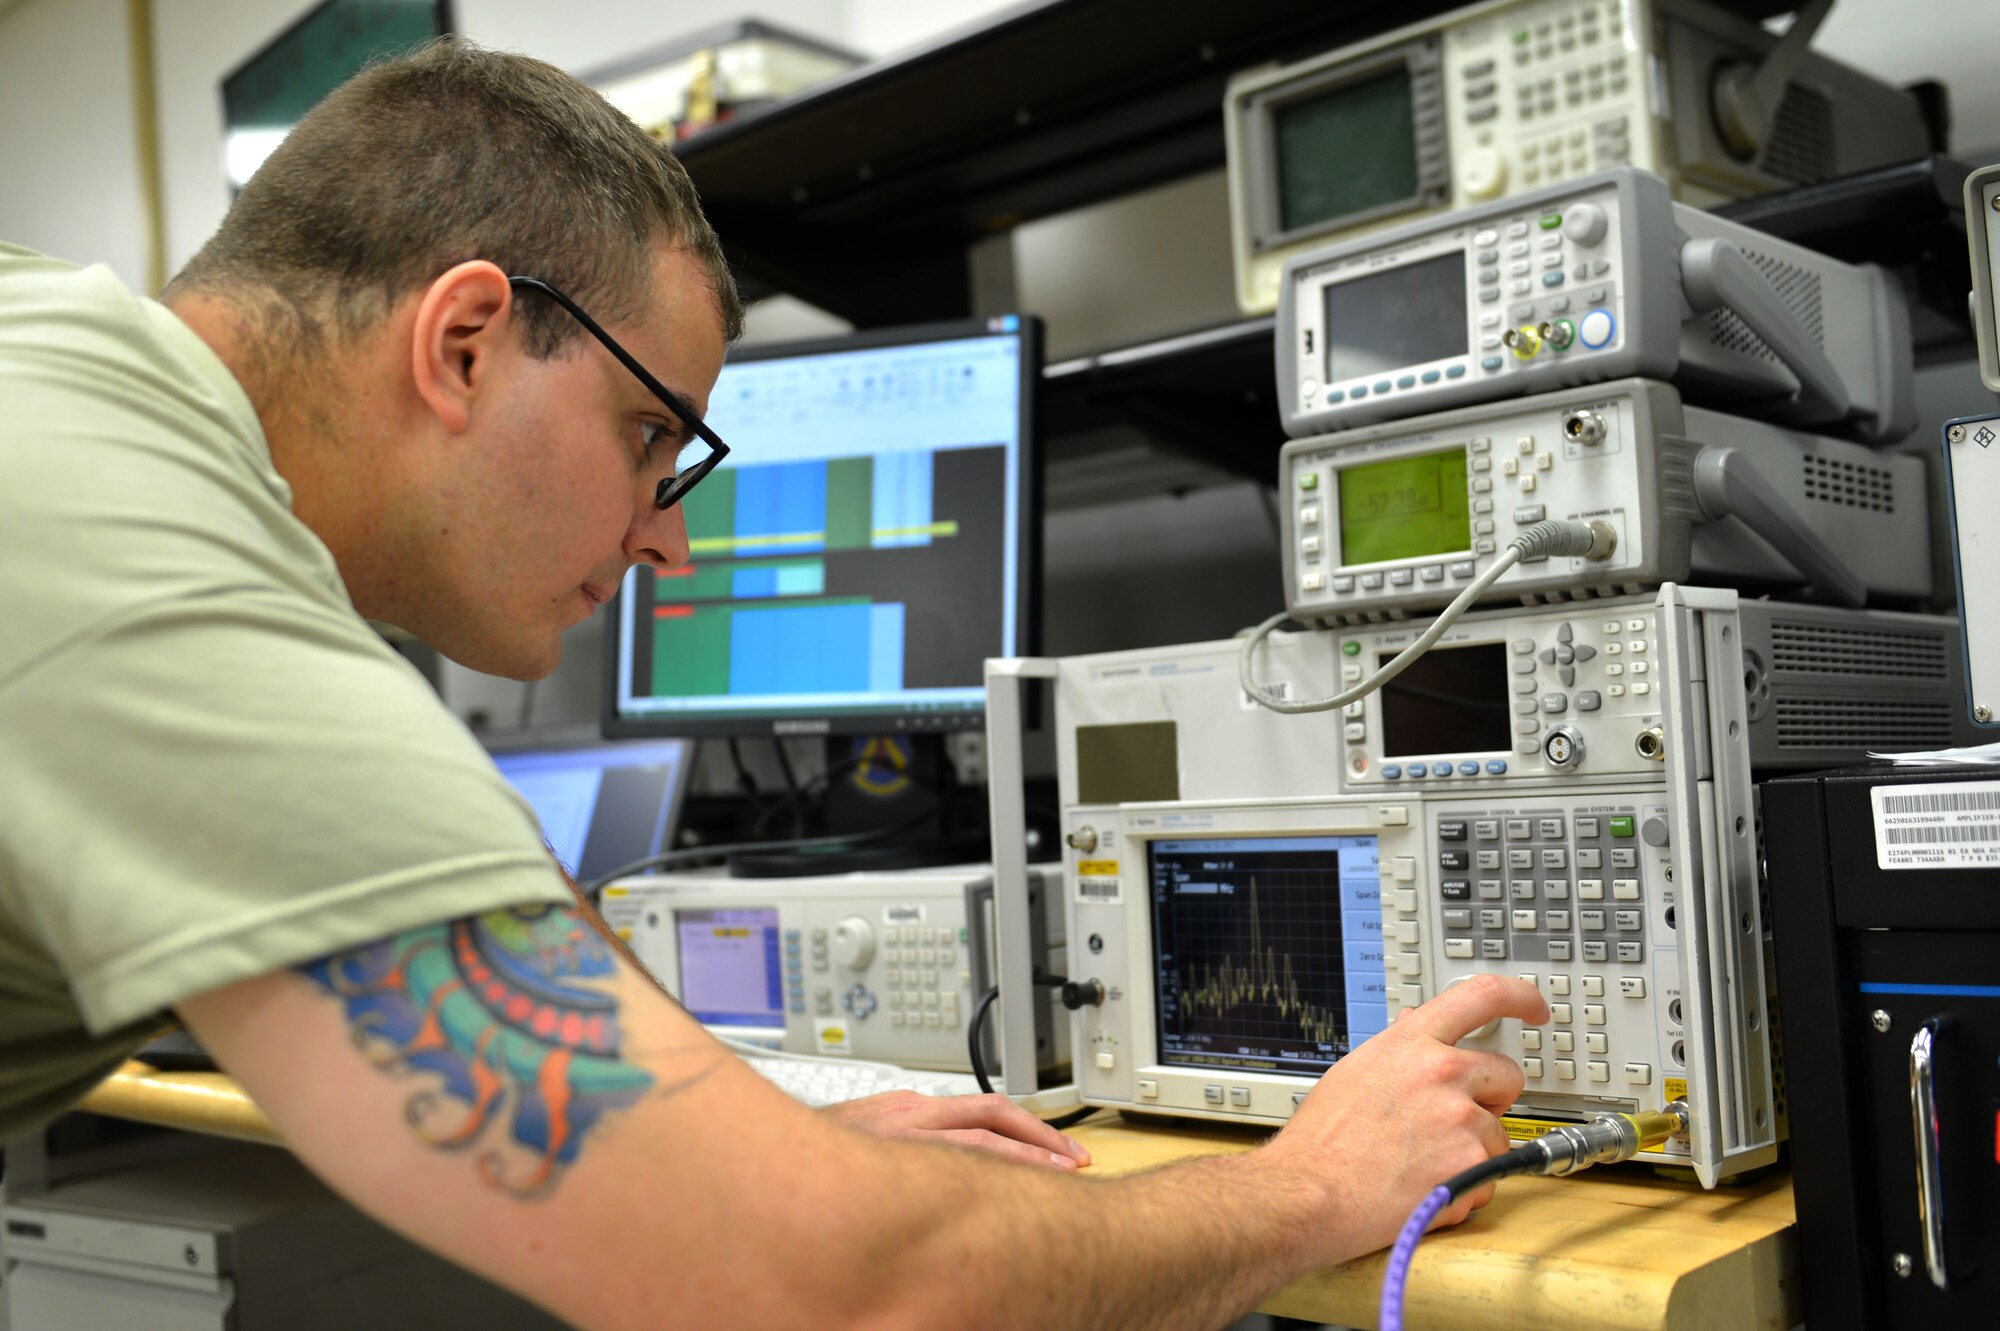 U.S. Air Force Staff Sgt. Timothy Miller, 20th Component Maintenance Squadron precision measurement equipment laboratory (PMEL) test measurement and diagnostic equipment craftsman, calibrates a power amplifier at Shaw Air Force Base, S.C., April 21, 2017. Airmen assigned to the 20th CMS PMEL flight adjust weaponry systems and hardware for space and ground-bound assets in support of the Air Force mission. (U.S. Air Force photo by Airman 1st Class Christopher Maldonado)